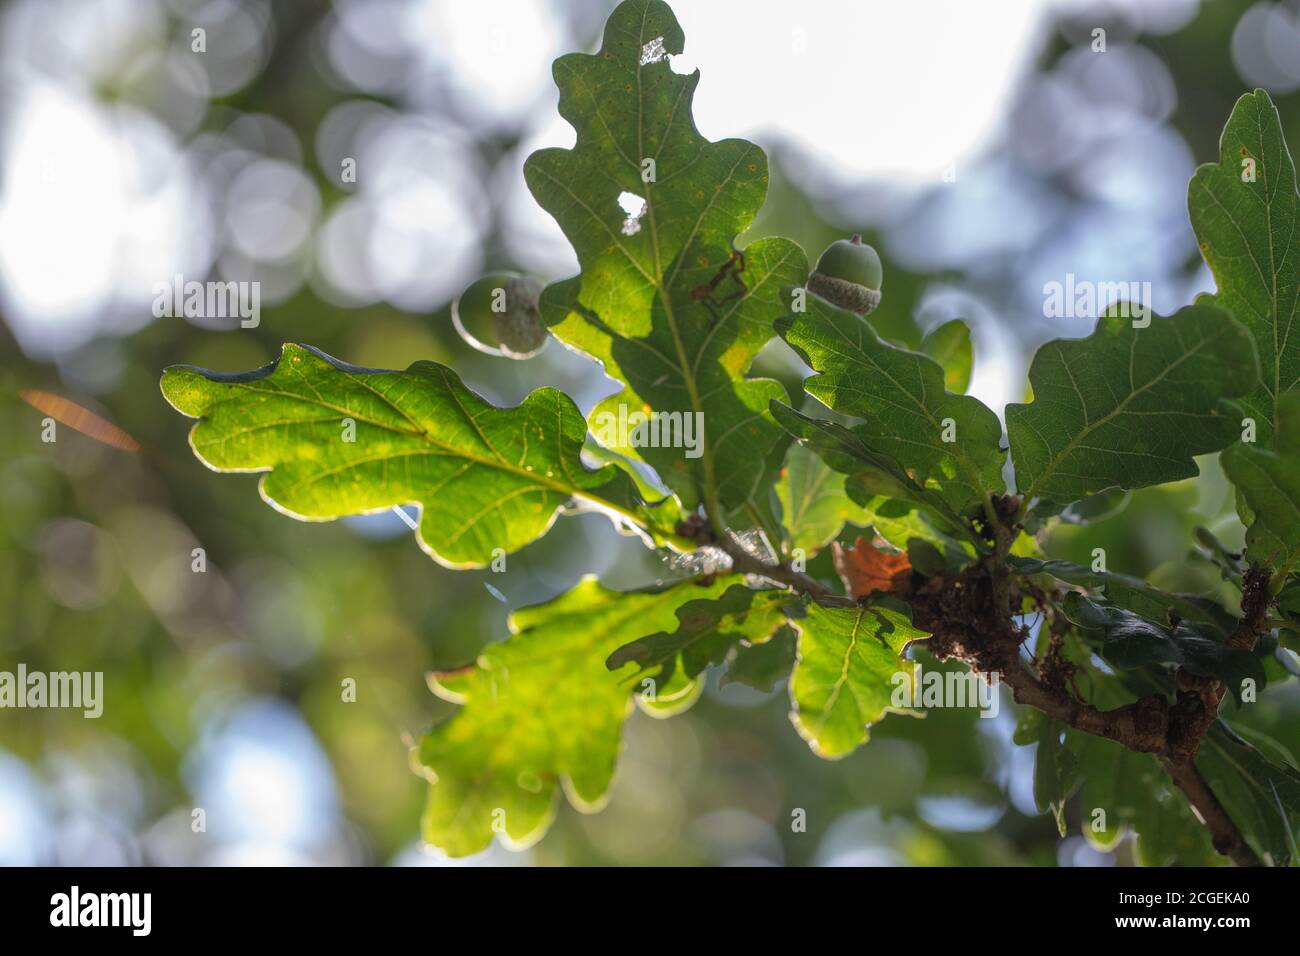 Leaves, foliage and Acorns. Fruits of the English Oak Tree (Quercus robur). Viewed from below, looking up through branches to the sky, contre jour. Stock Photo